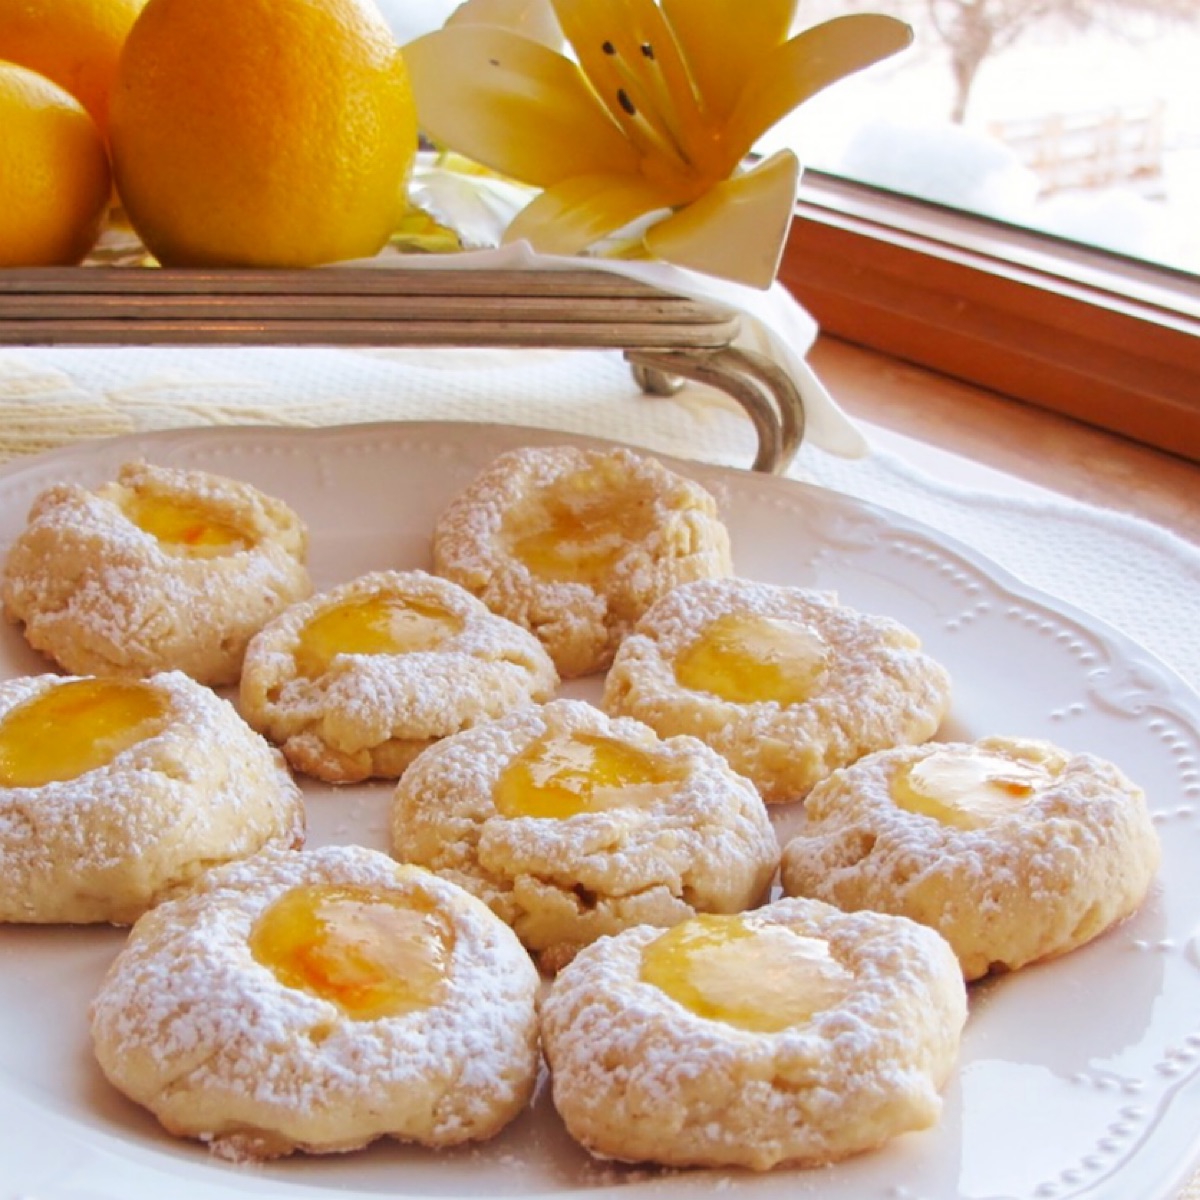 Thumbprint cookies with lemon marmalade filling on a white plate.